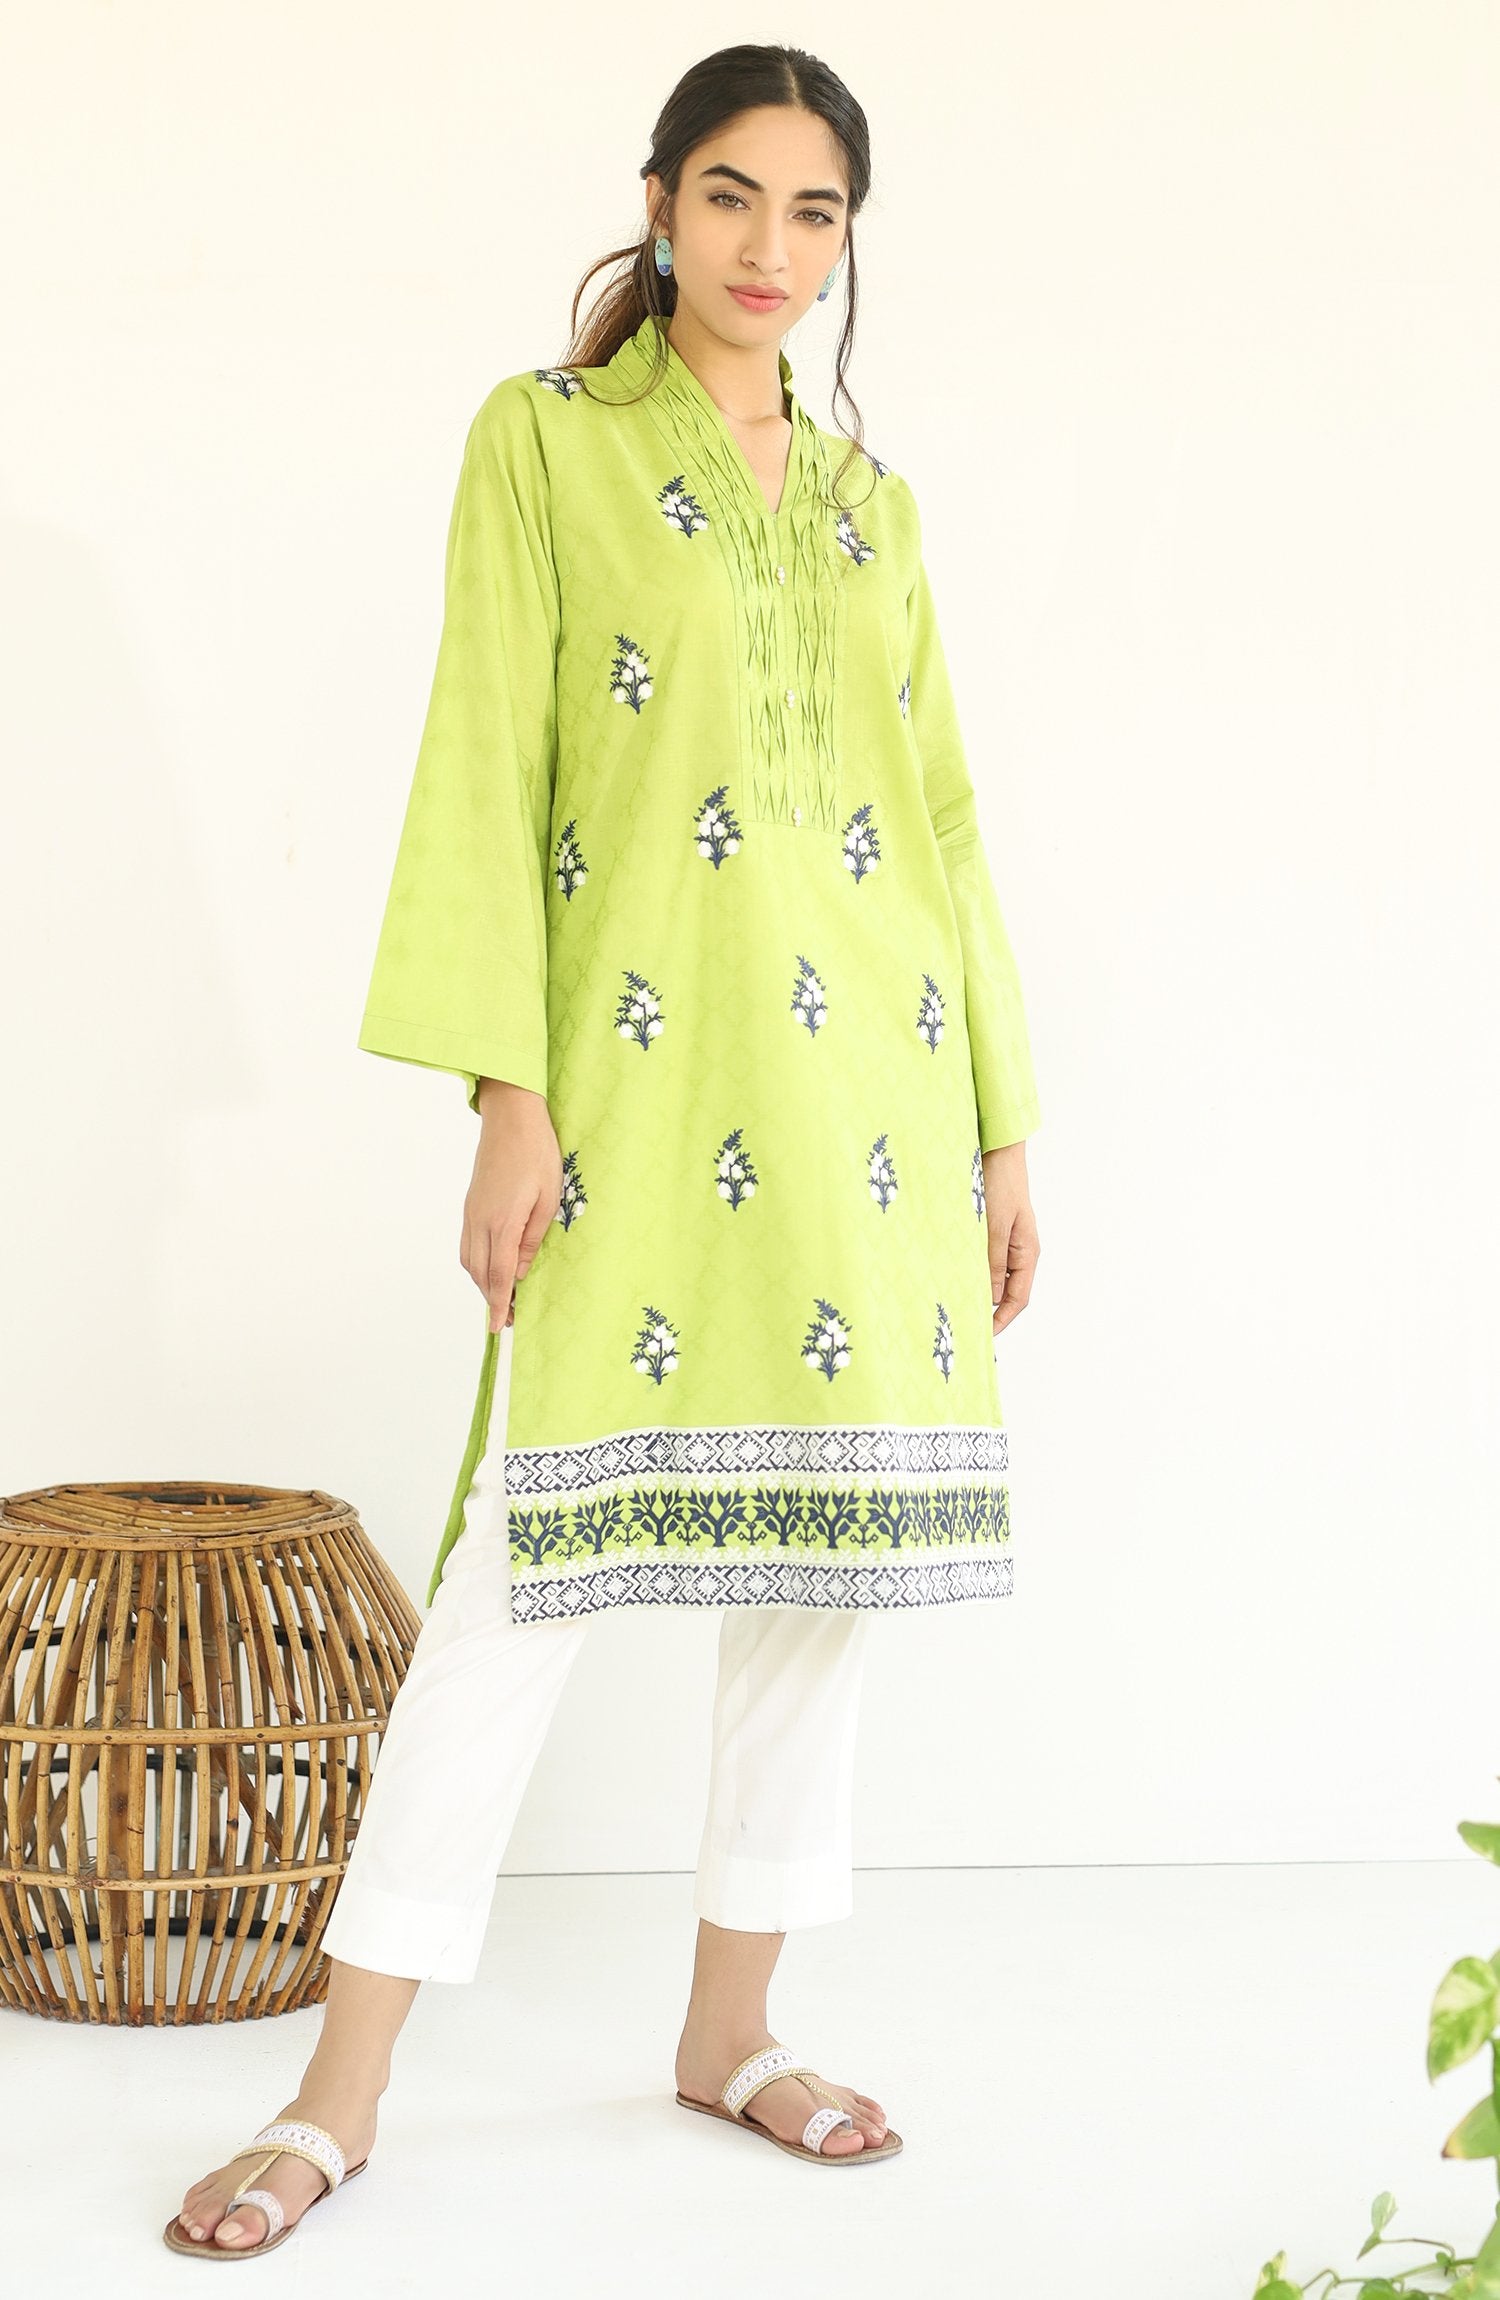 Stitched 1 Piece Embroidered Jacquard Shirt (nrds-152)